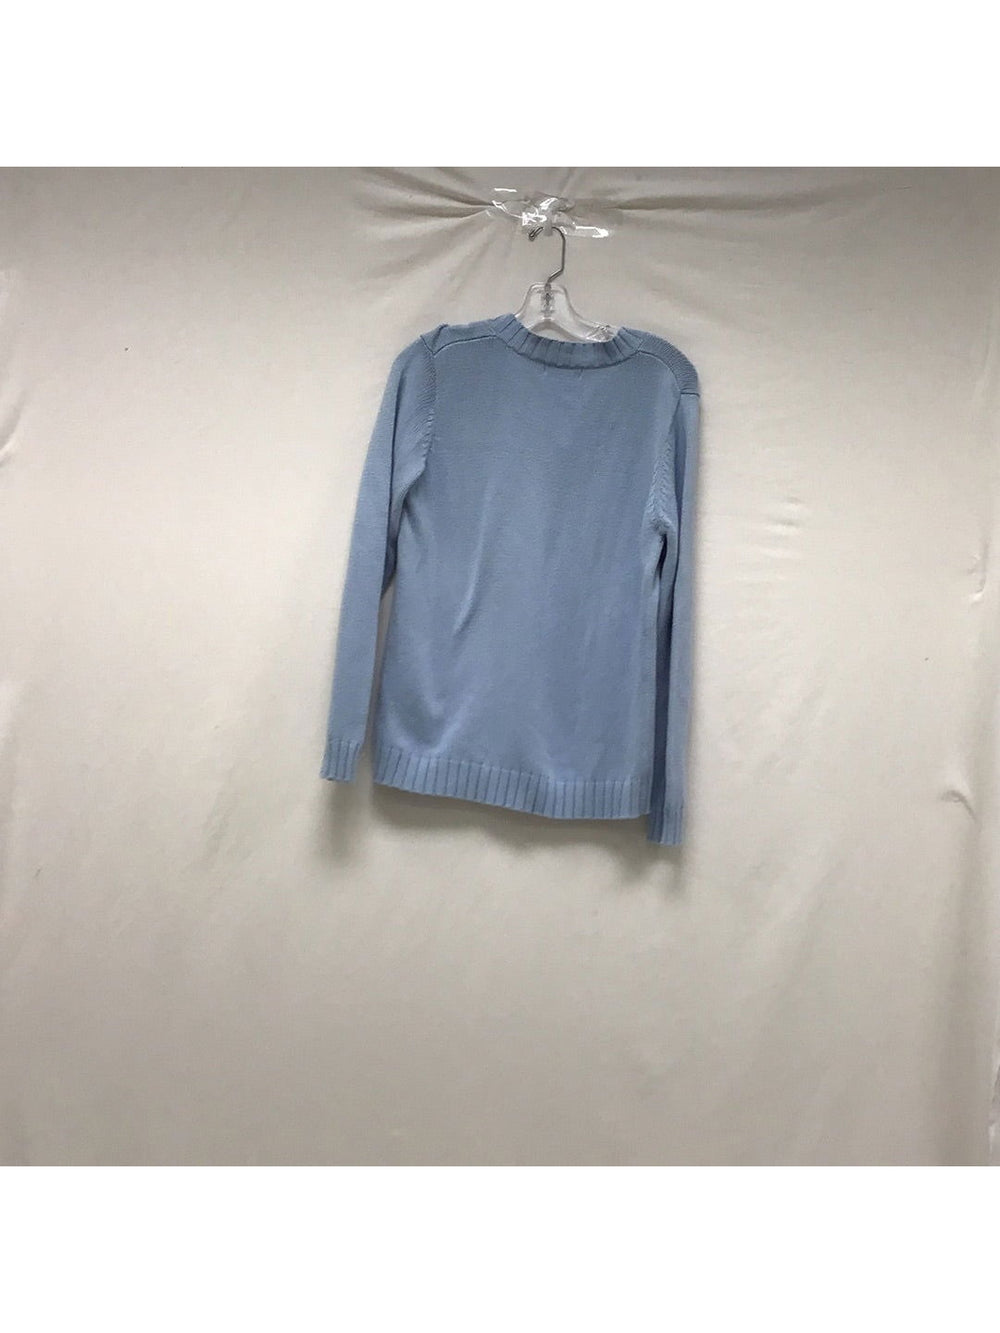 EDDIE BAUER Womens Light Blue V Neck Knit Sweater Size Large - The Kennedy Collective Thrift - 